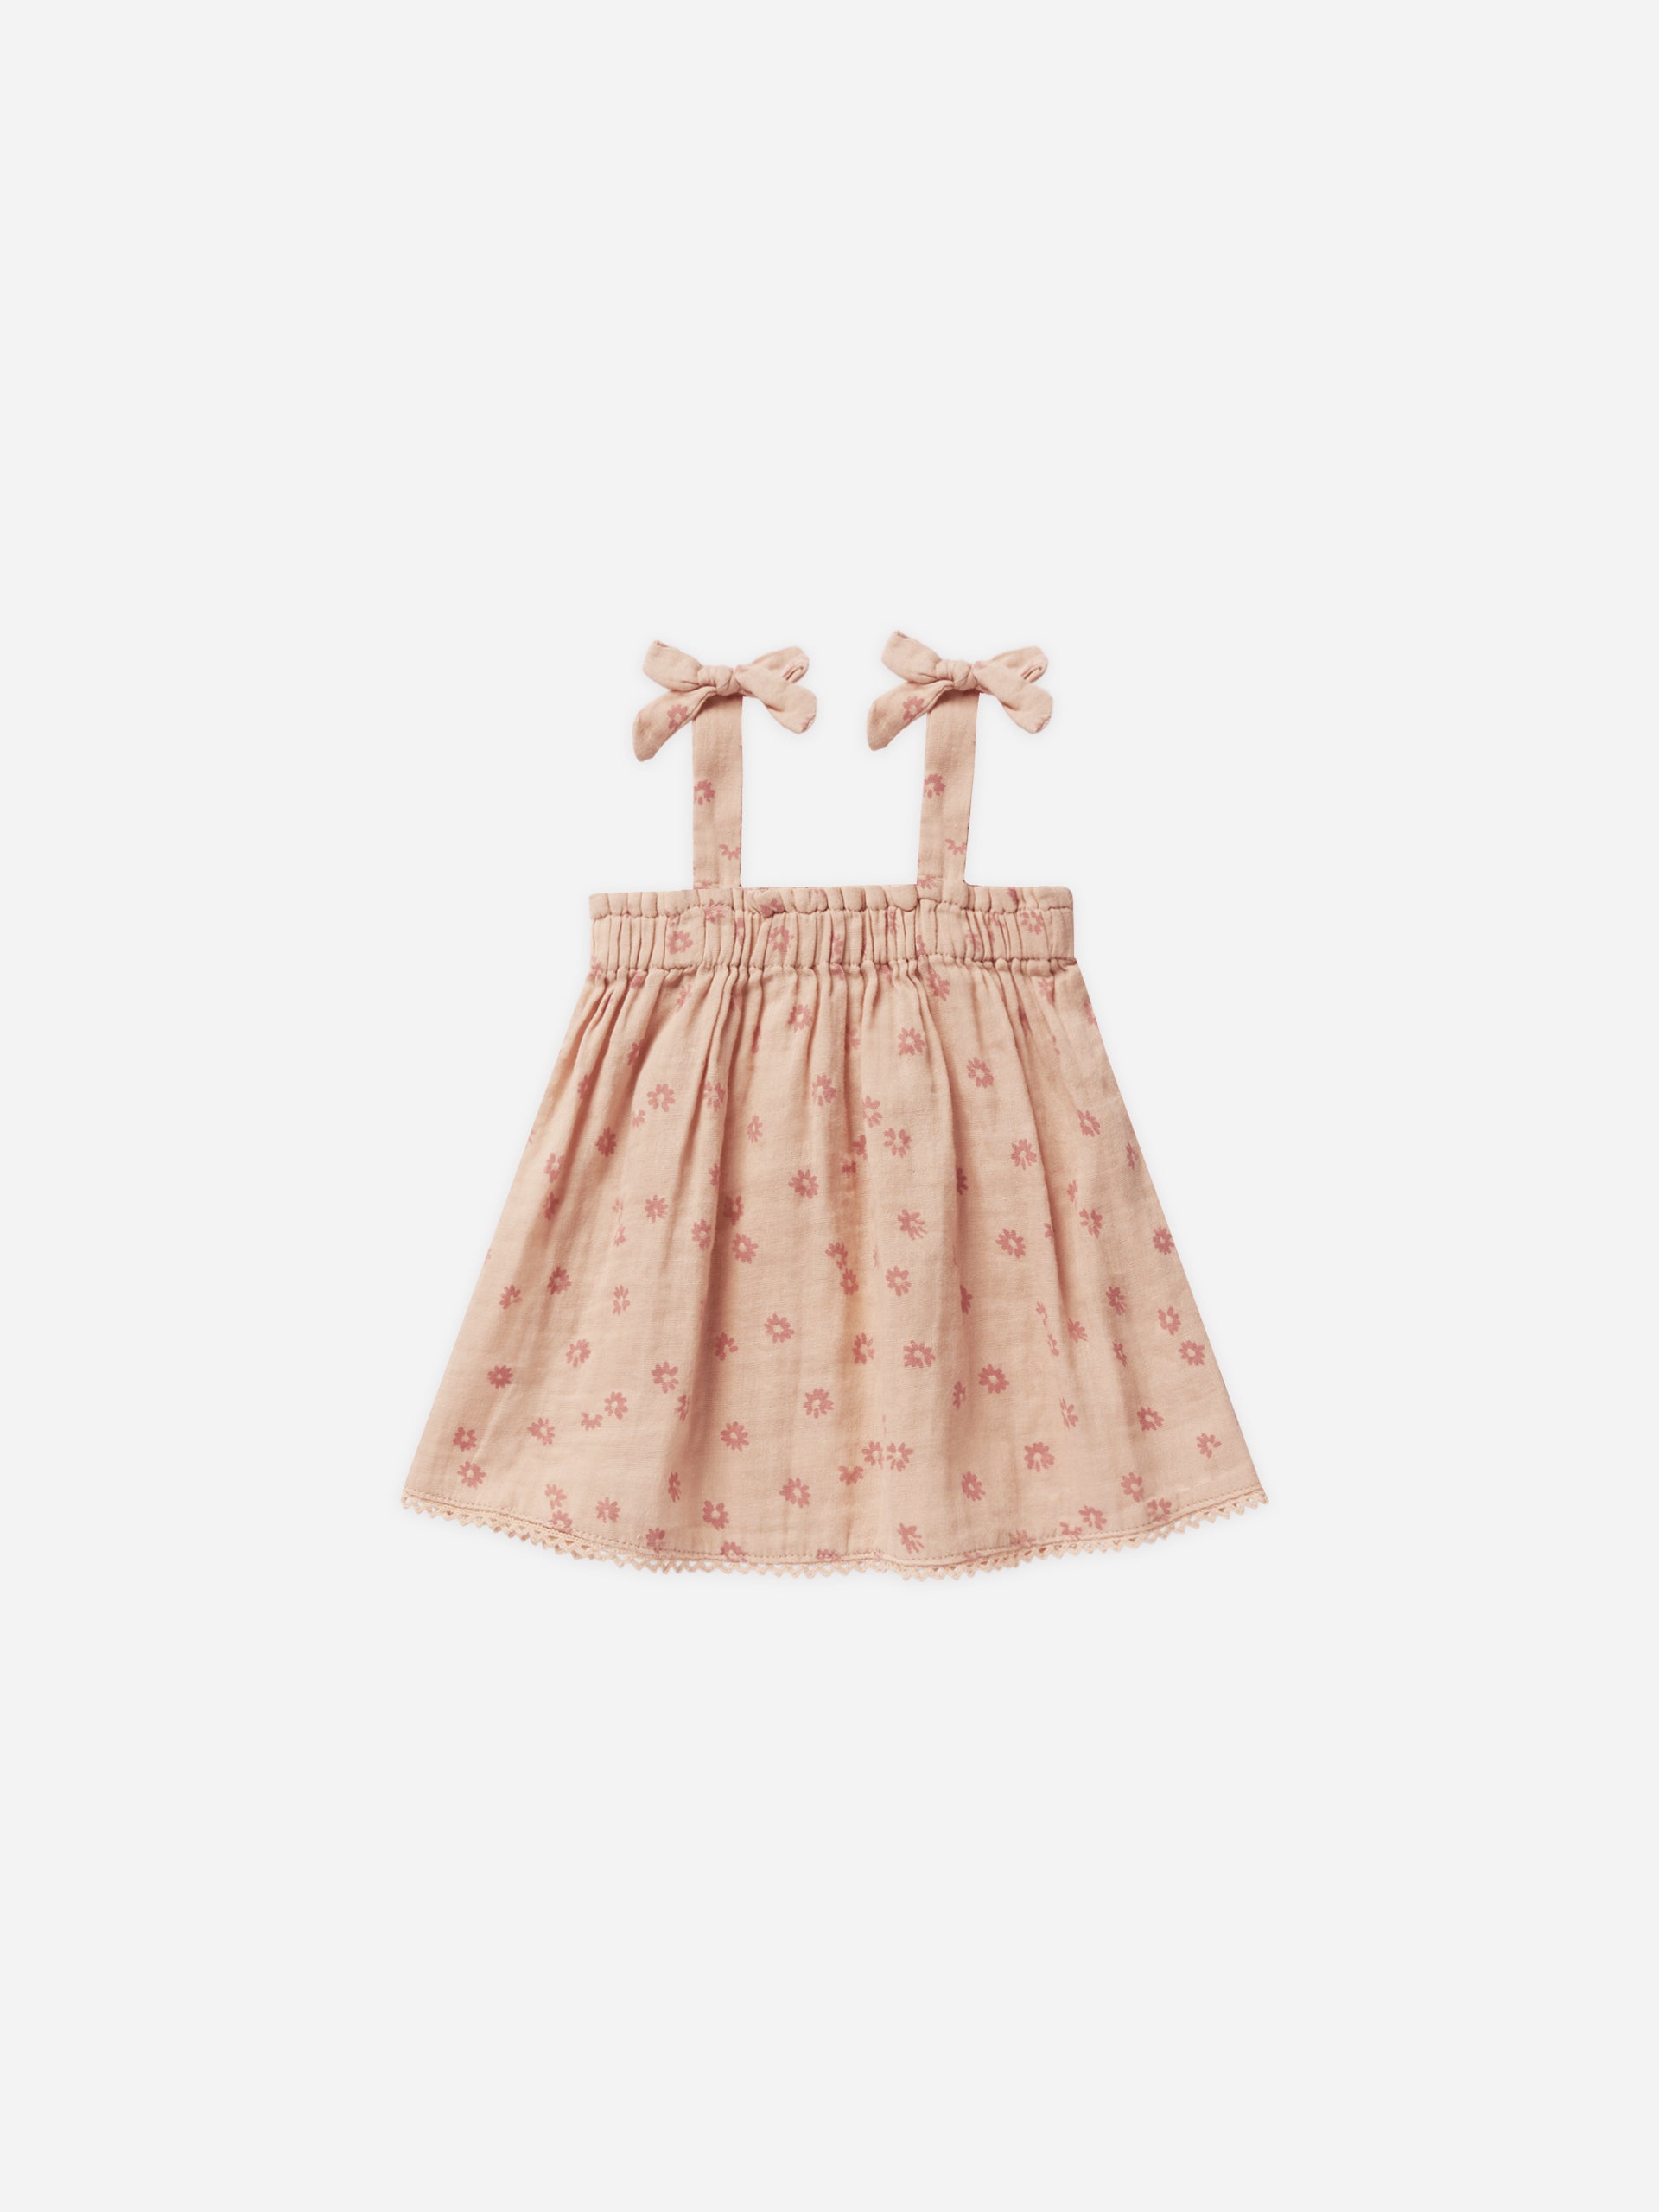 Remi Top || Pink Daisy - Rylee + Cru | Kids Clothes | Trendy Baby Clothes | Modern Infant Outfits |